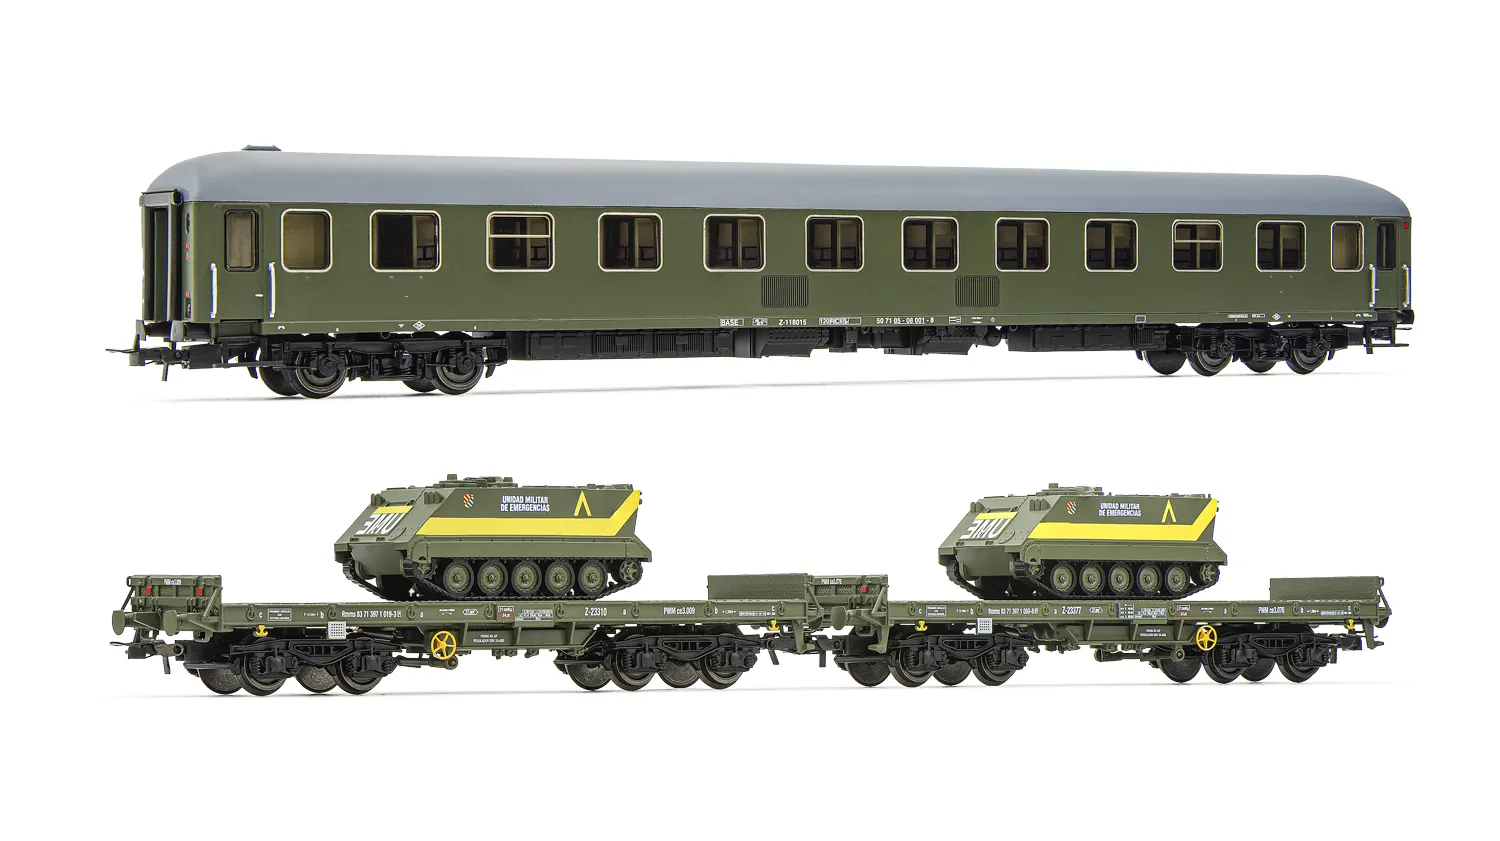 RENFE, 3-unit set, 12000 + 2x PMM (1 loaded with tank +1 without load), olive green "Military" livery, period V